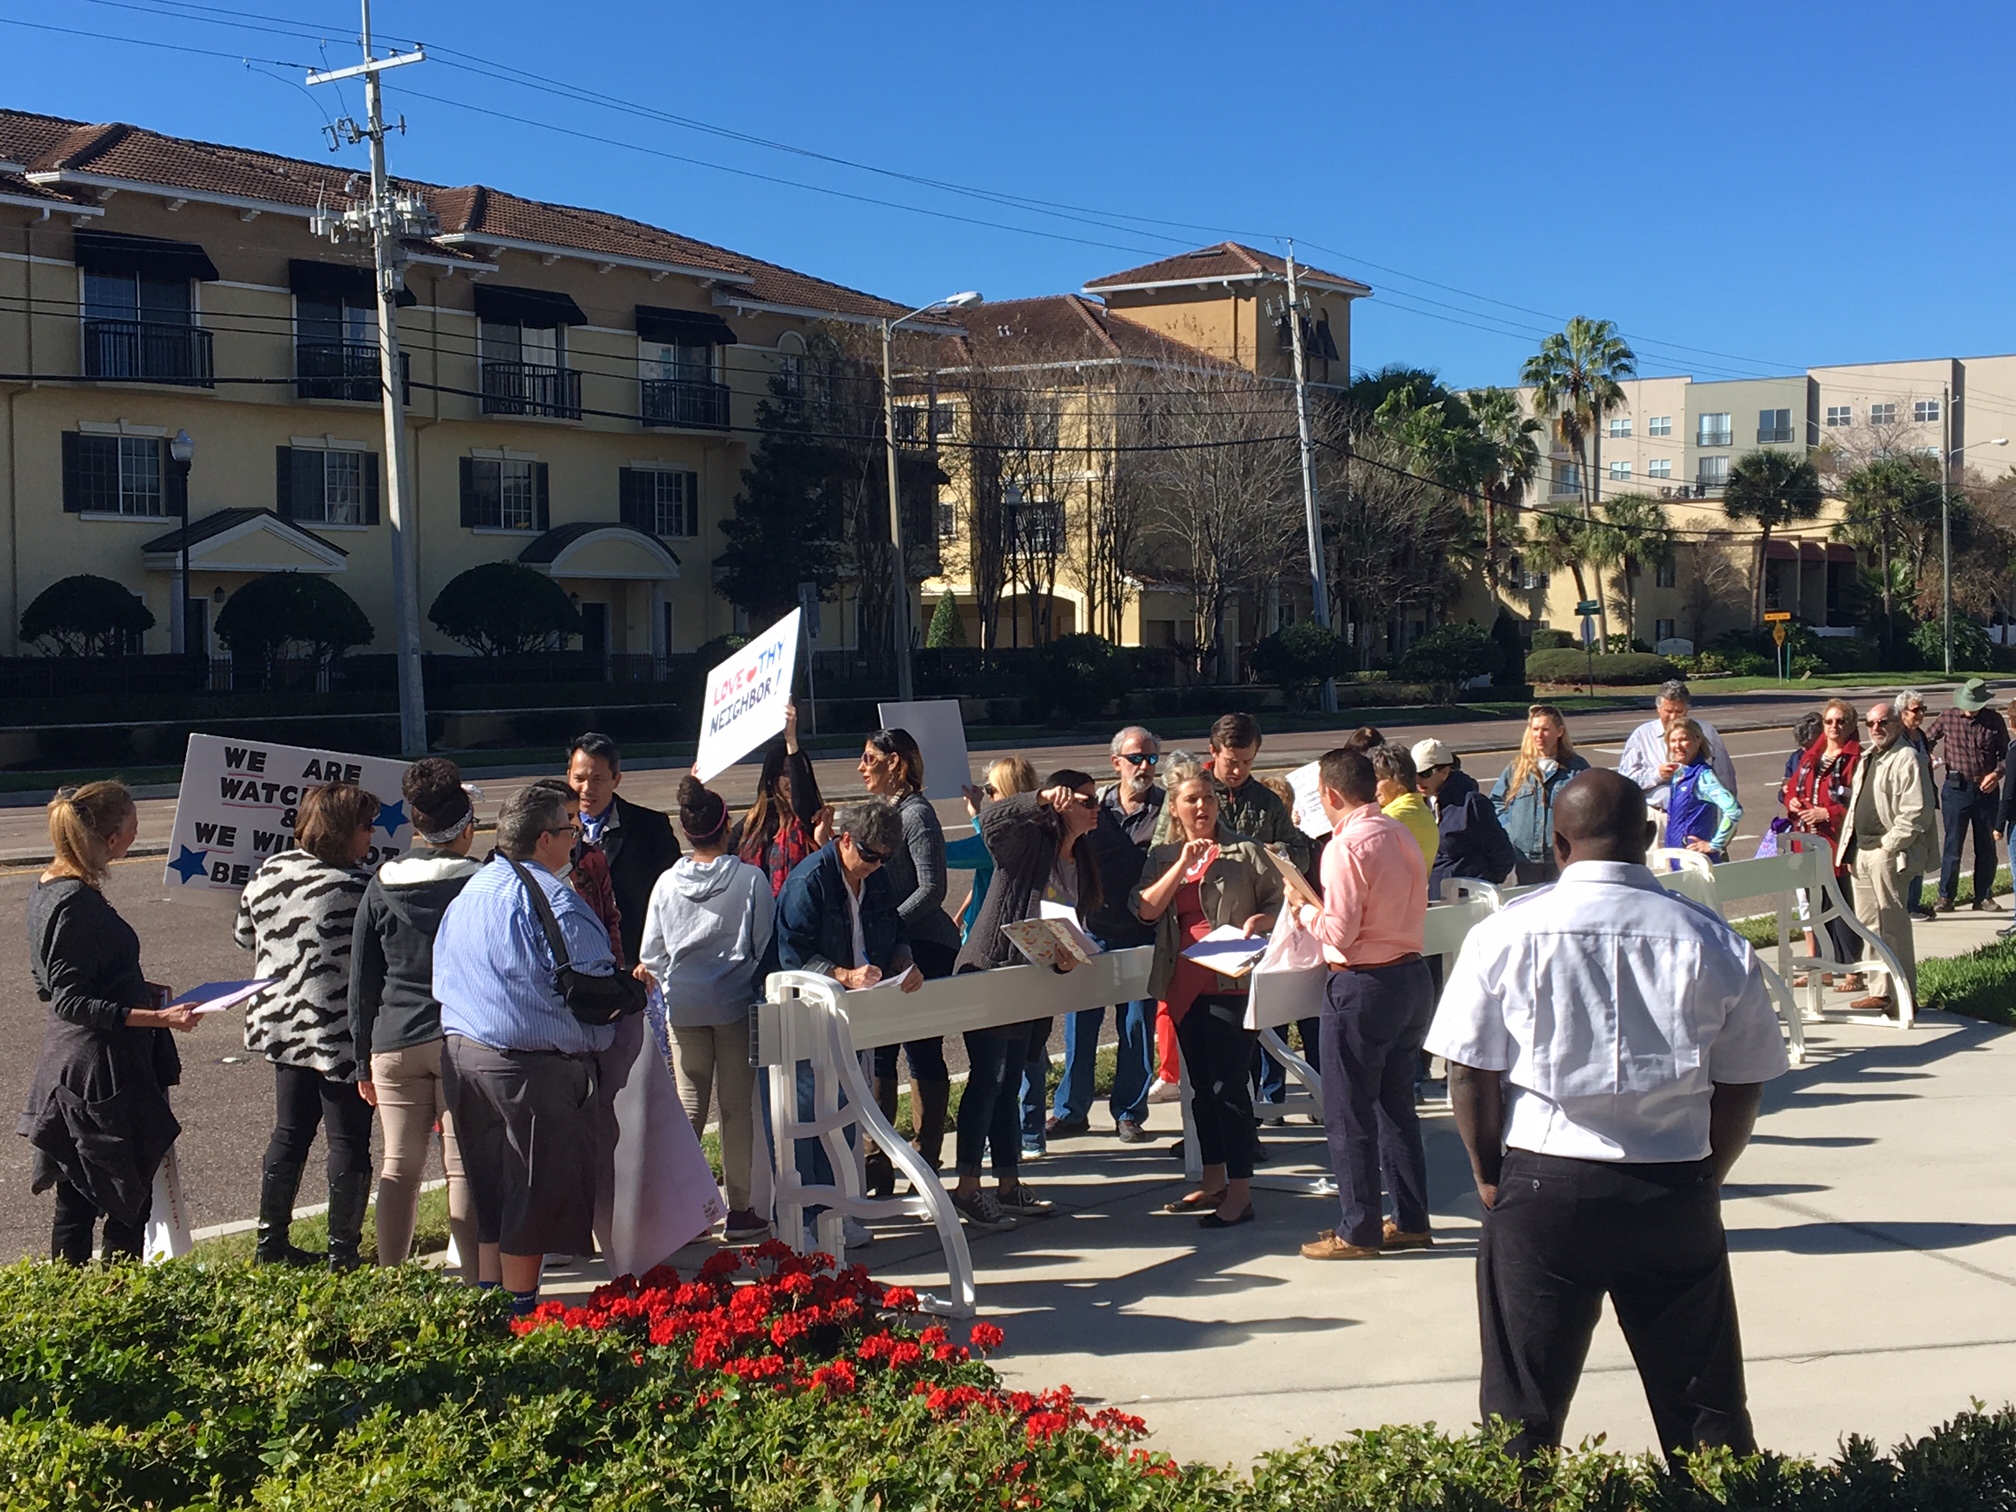 Resist Trump every Tuesday at Marco Rubio’s Tampa office